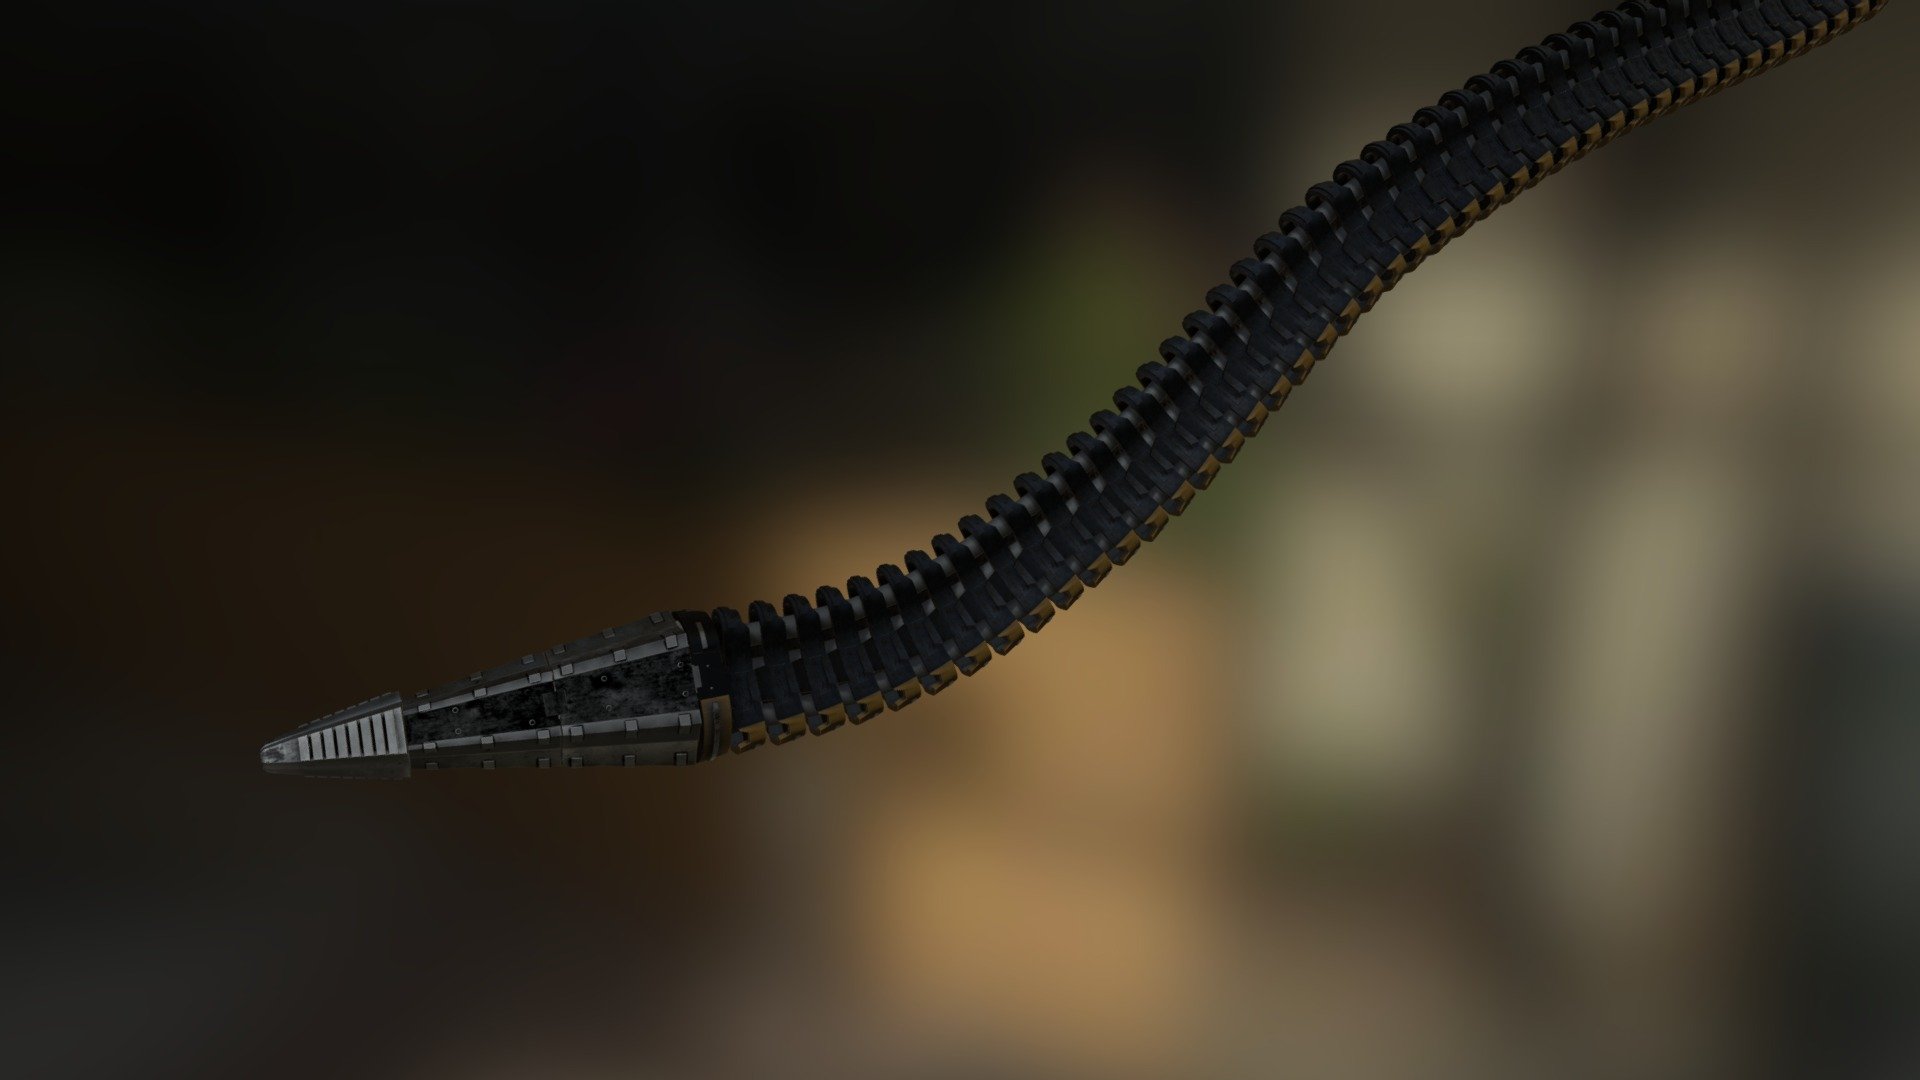 Arm of the doctor octopus from Spider-Man 2 (2004).
Model 99% faithful to the film.
Modeled in 3d on Blender 3d model